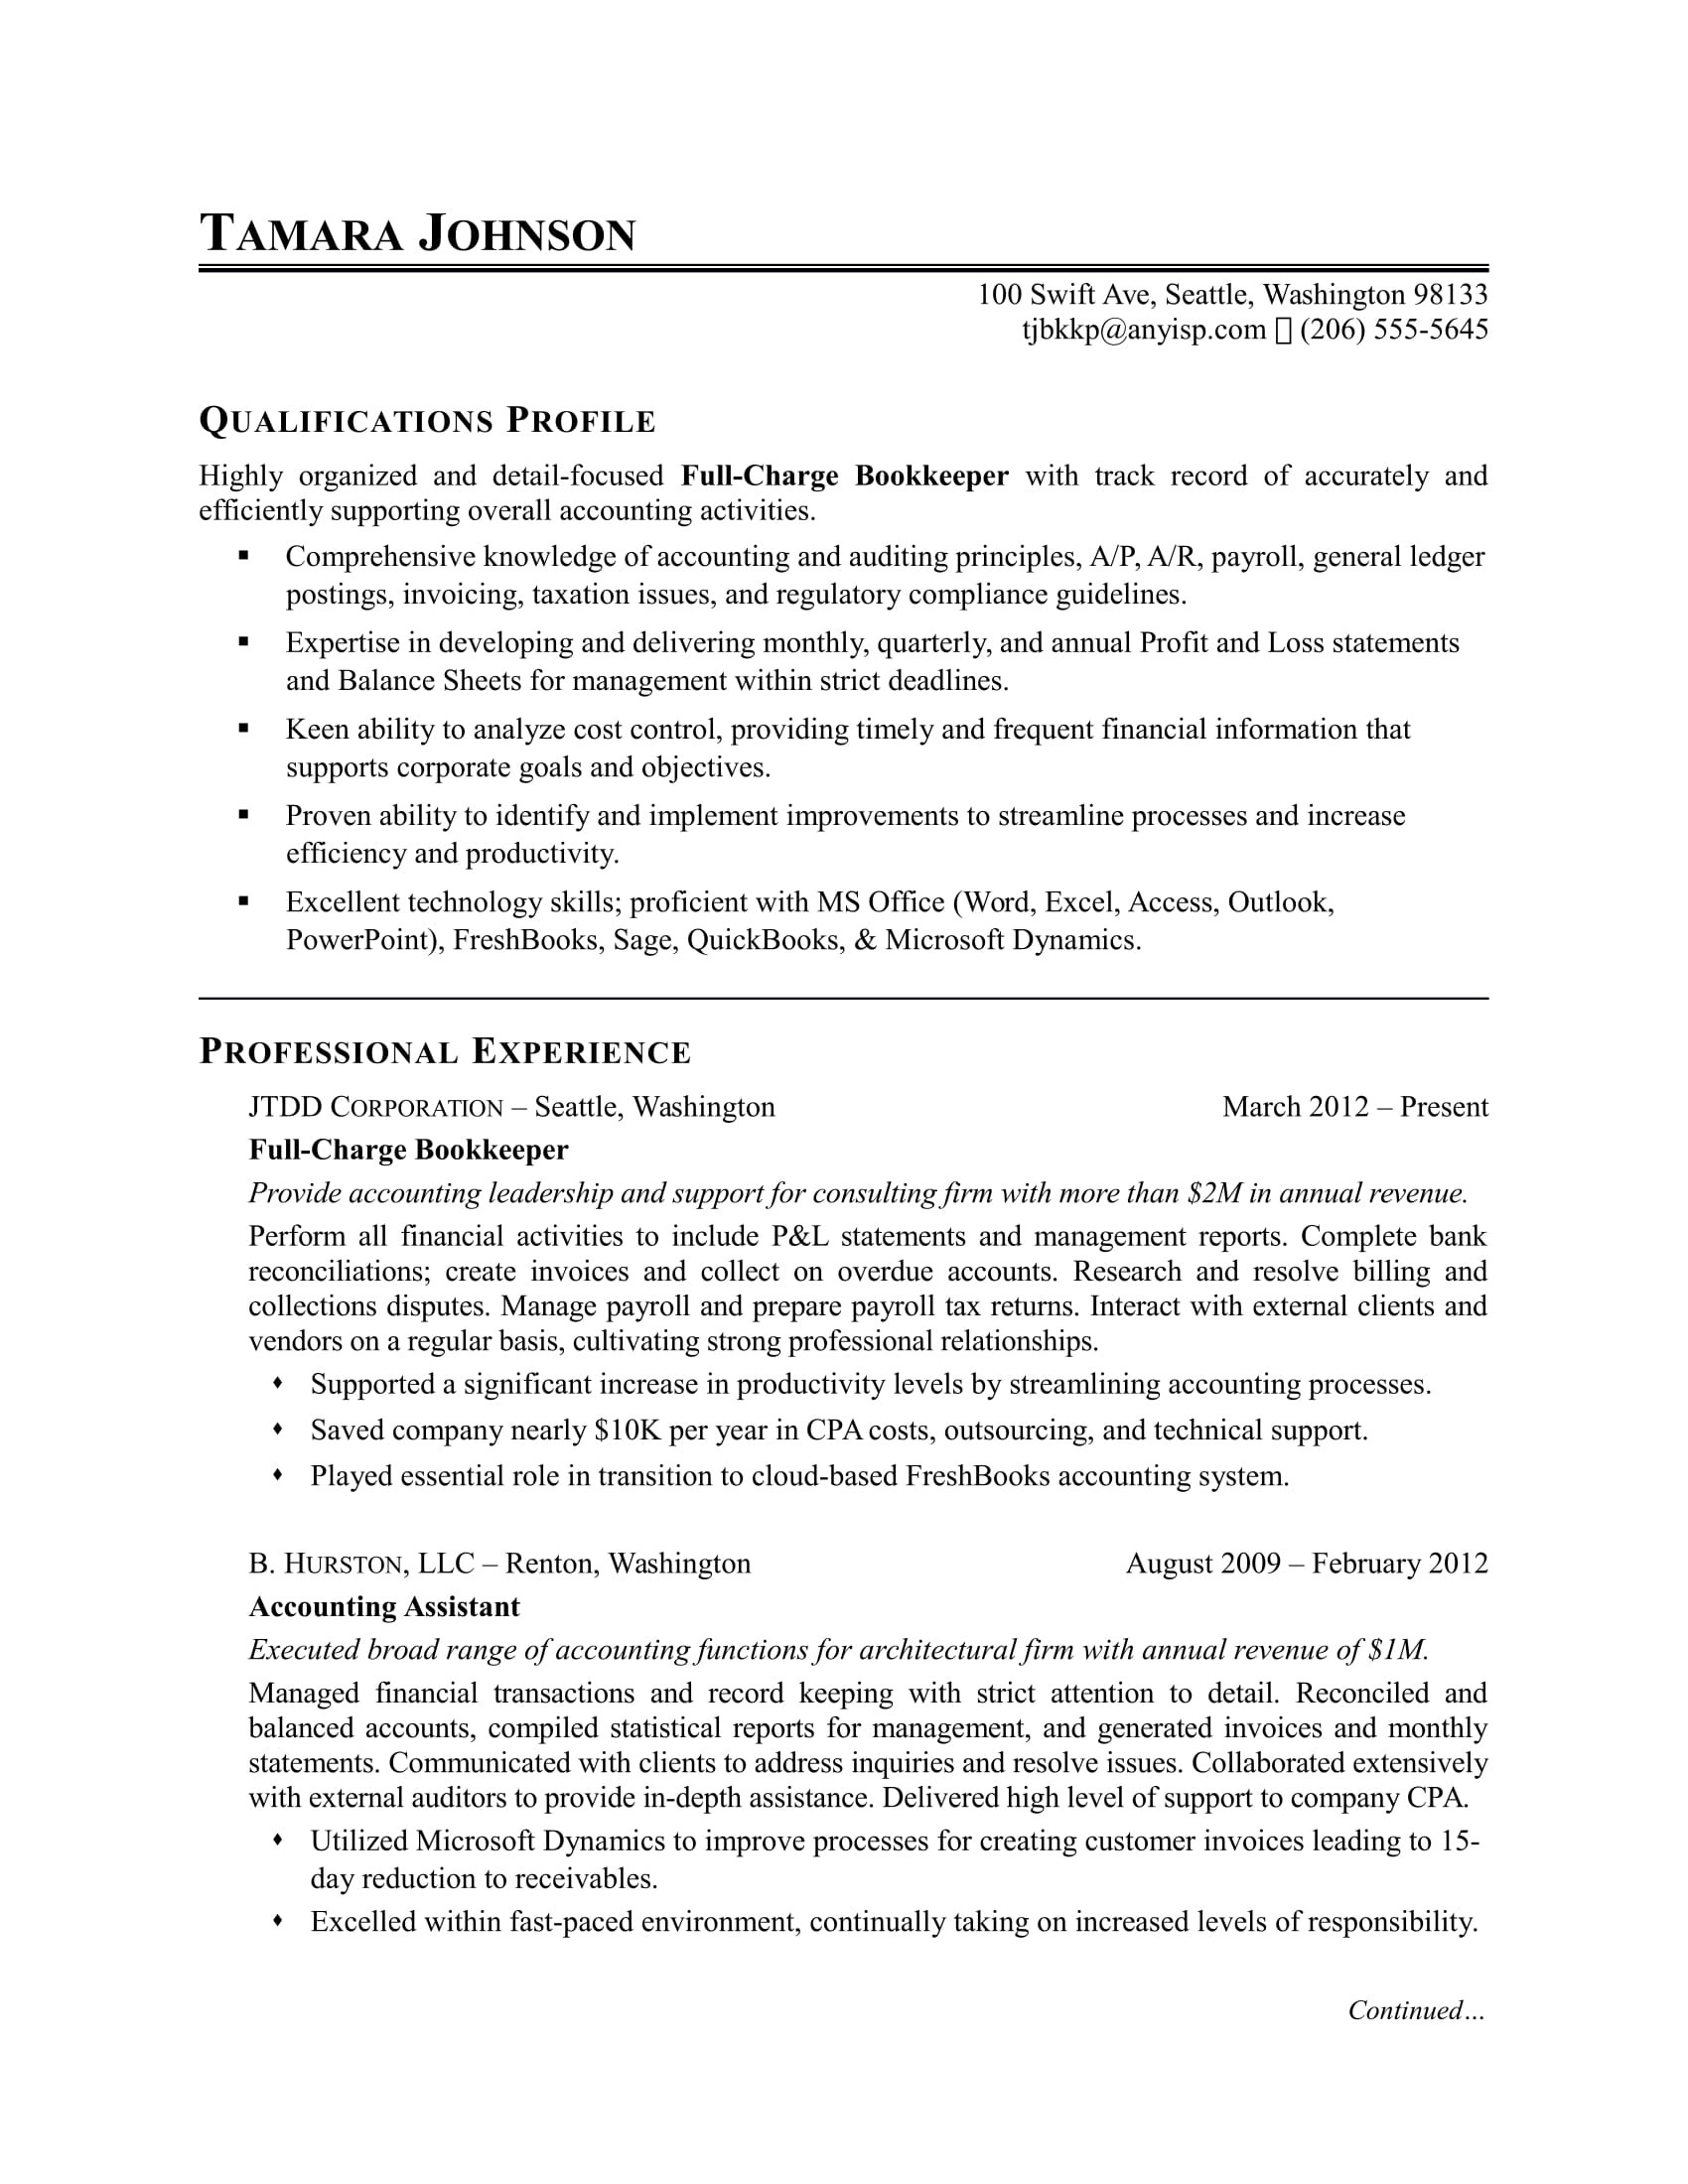 Sample Resume for Newly Passed Cpa Bookkeeper Resume Sample Monster.com